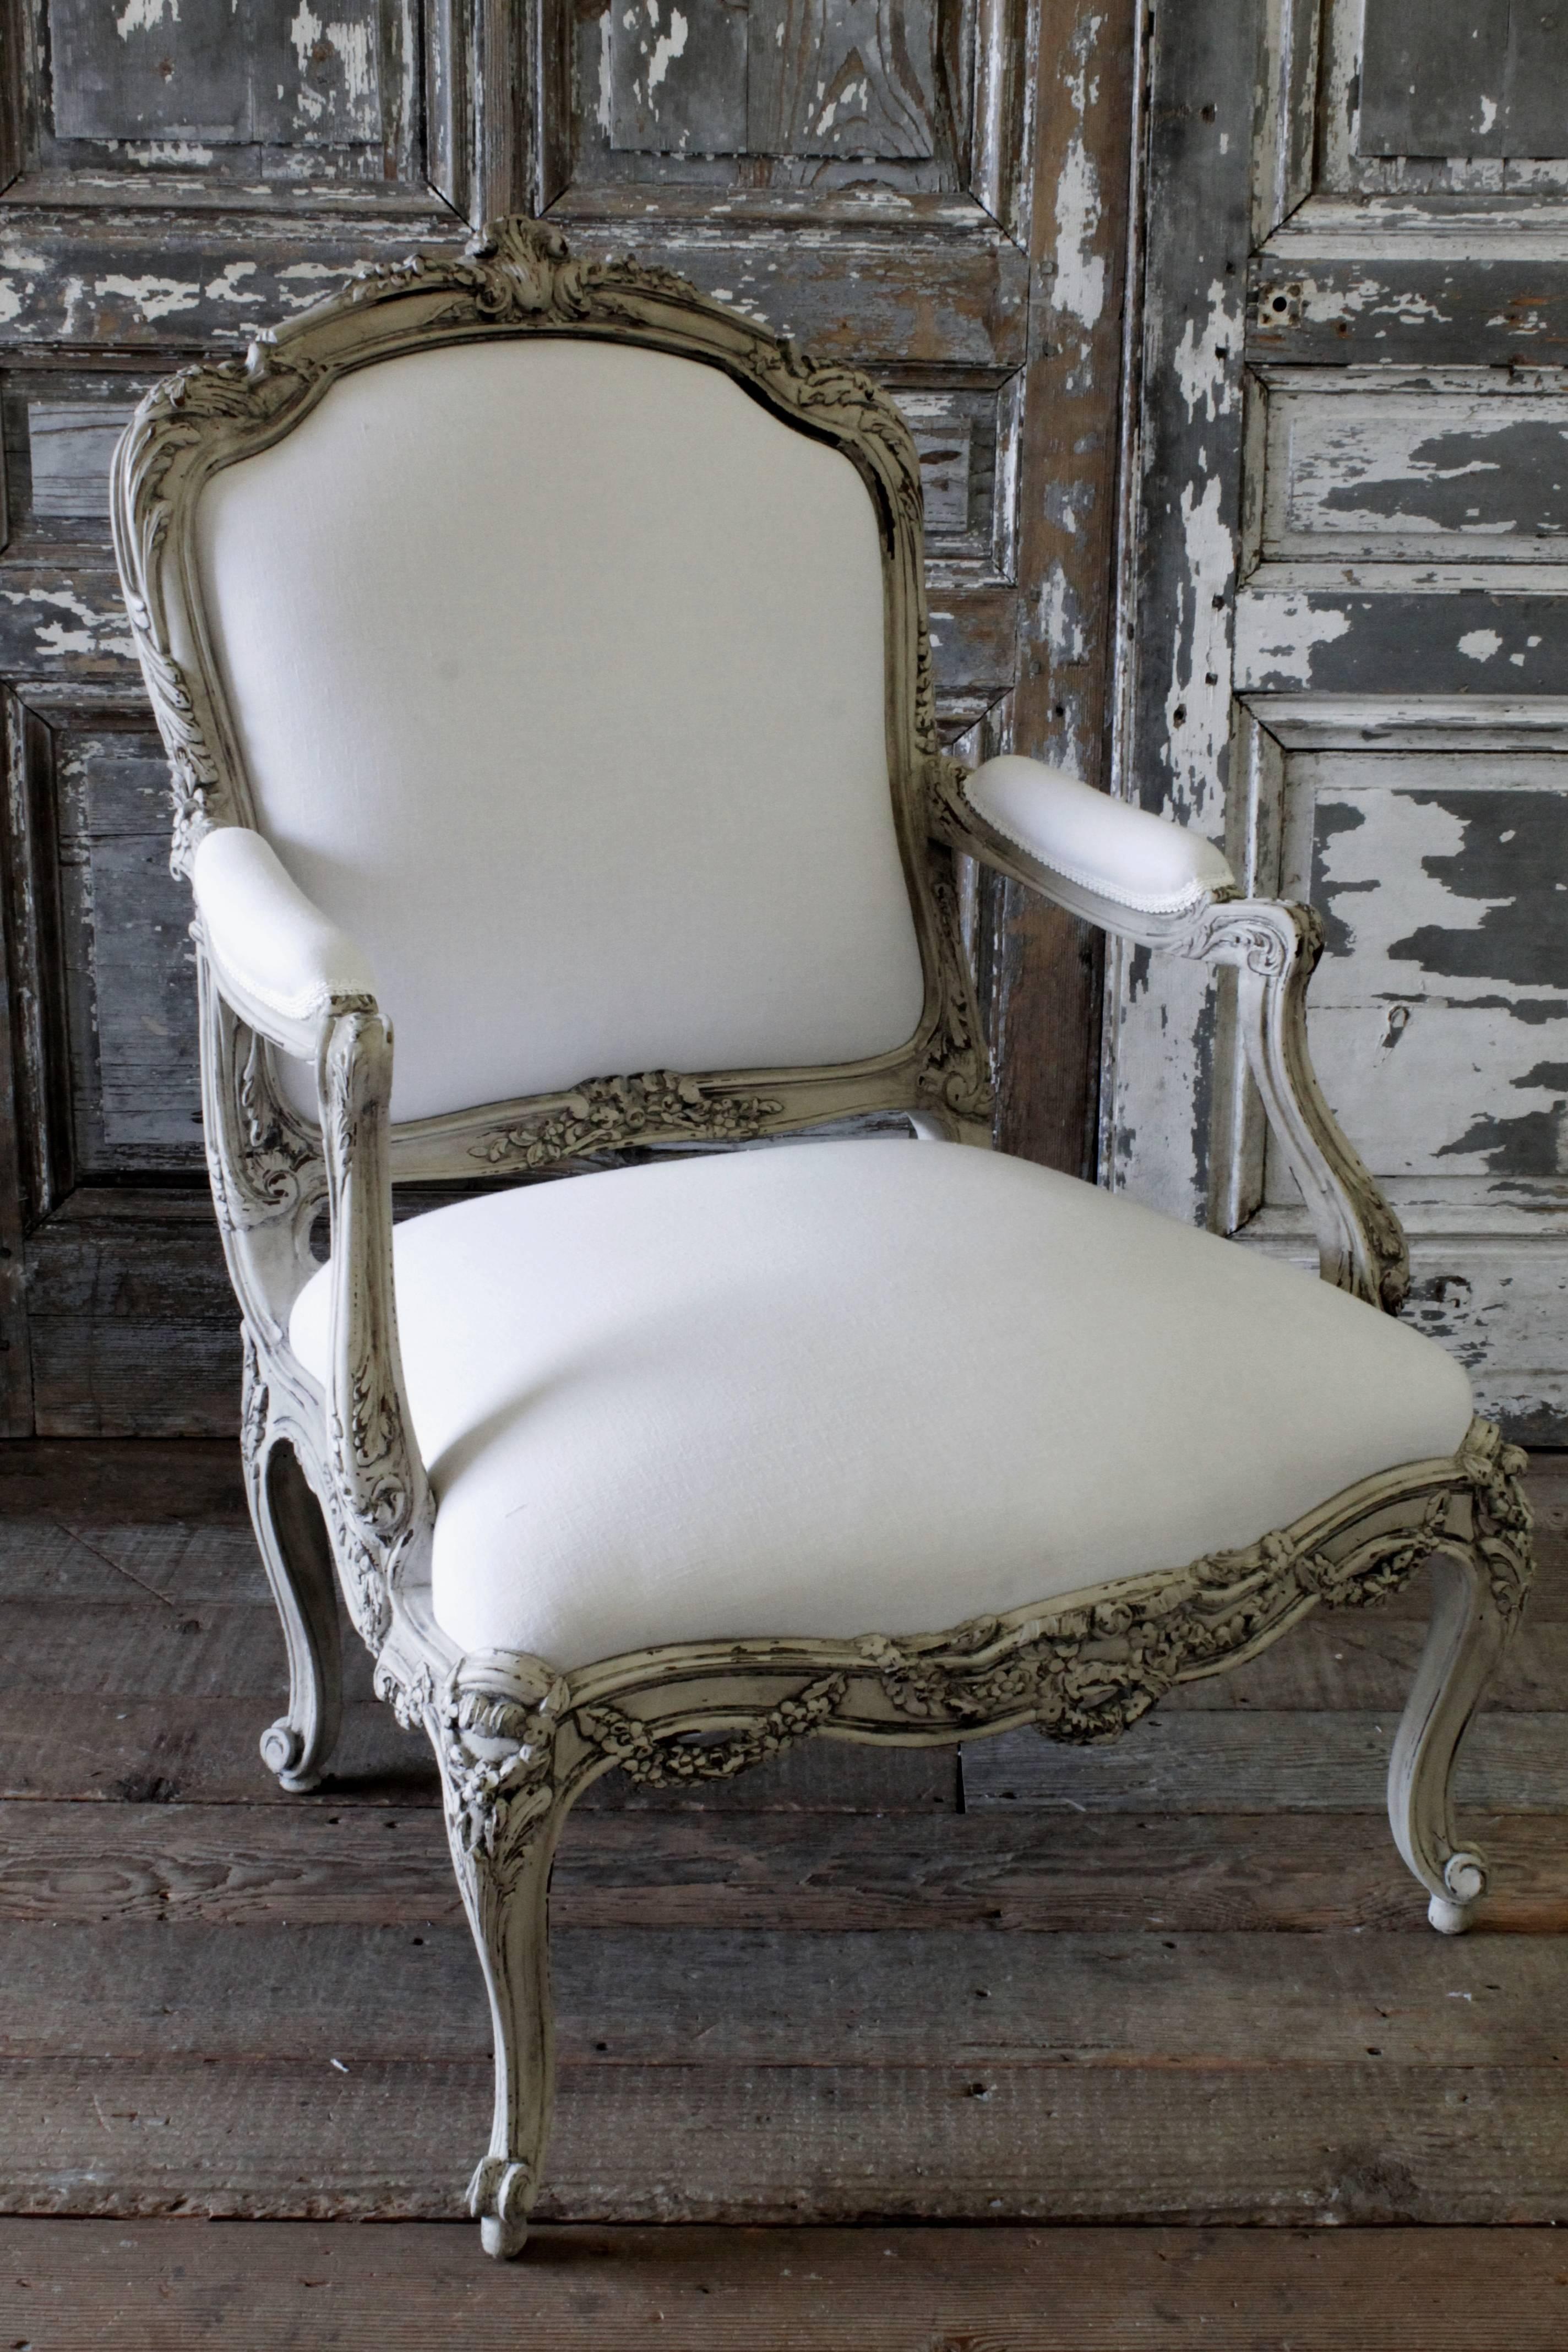 Delicate and beautiful flower detailing in carved wood framework, reupholstered in an antique French Homespun linen. The chair is painted in a soft clam shell grey, with pure white linen,
circa 1900-1910.